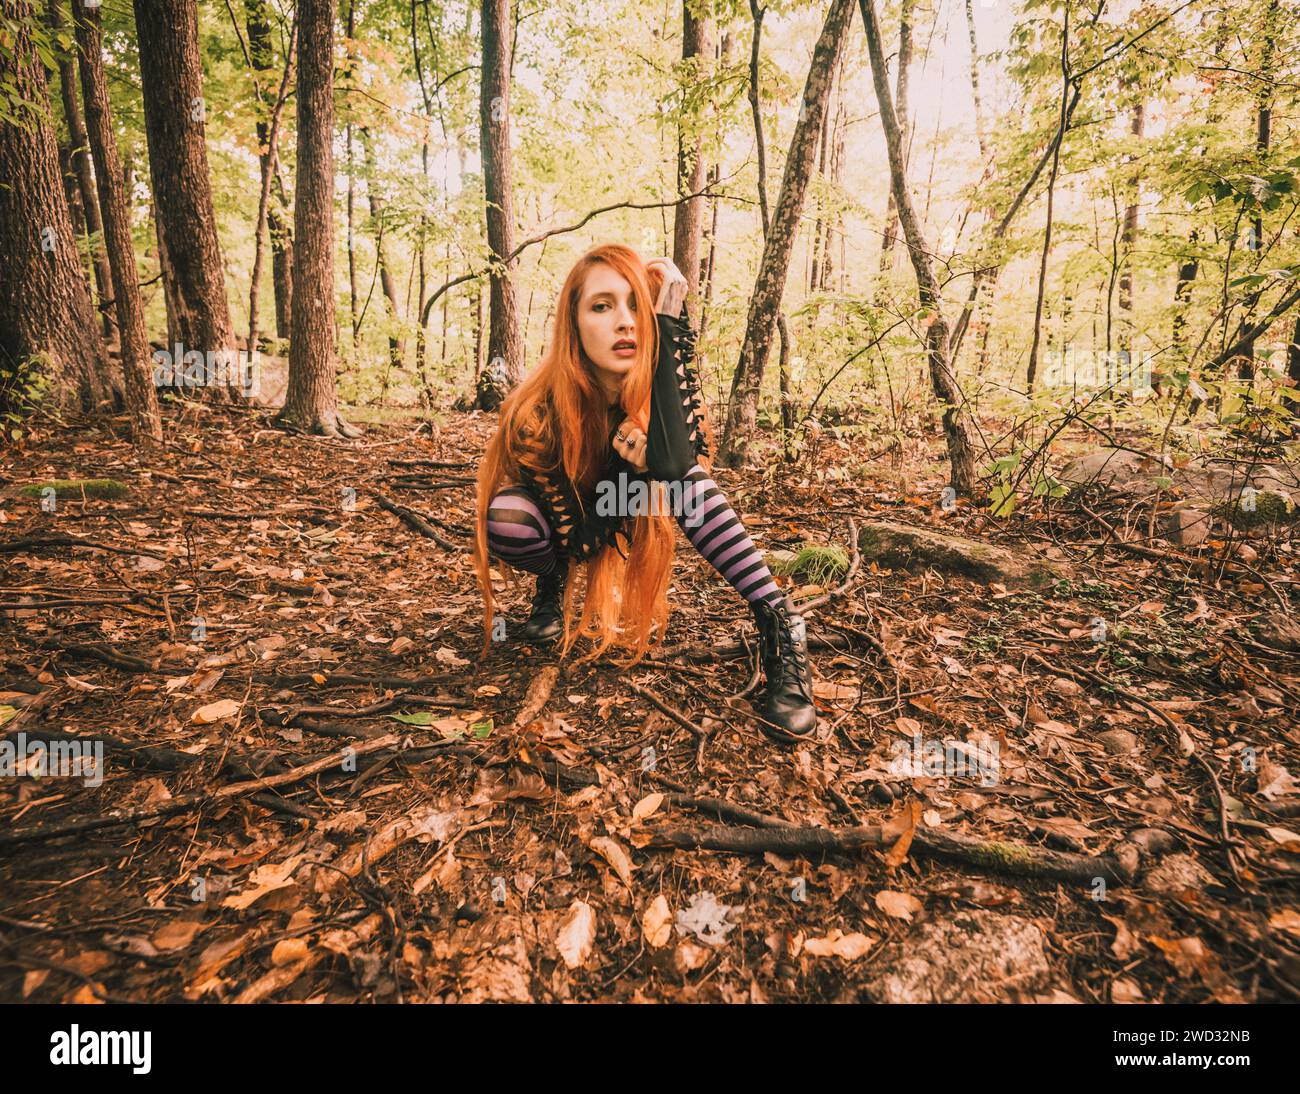 A red-haired young woman in purple striped leggings posing in the forest Stock Photo